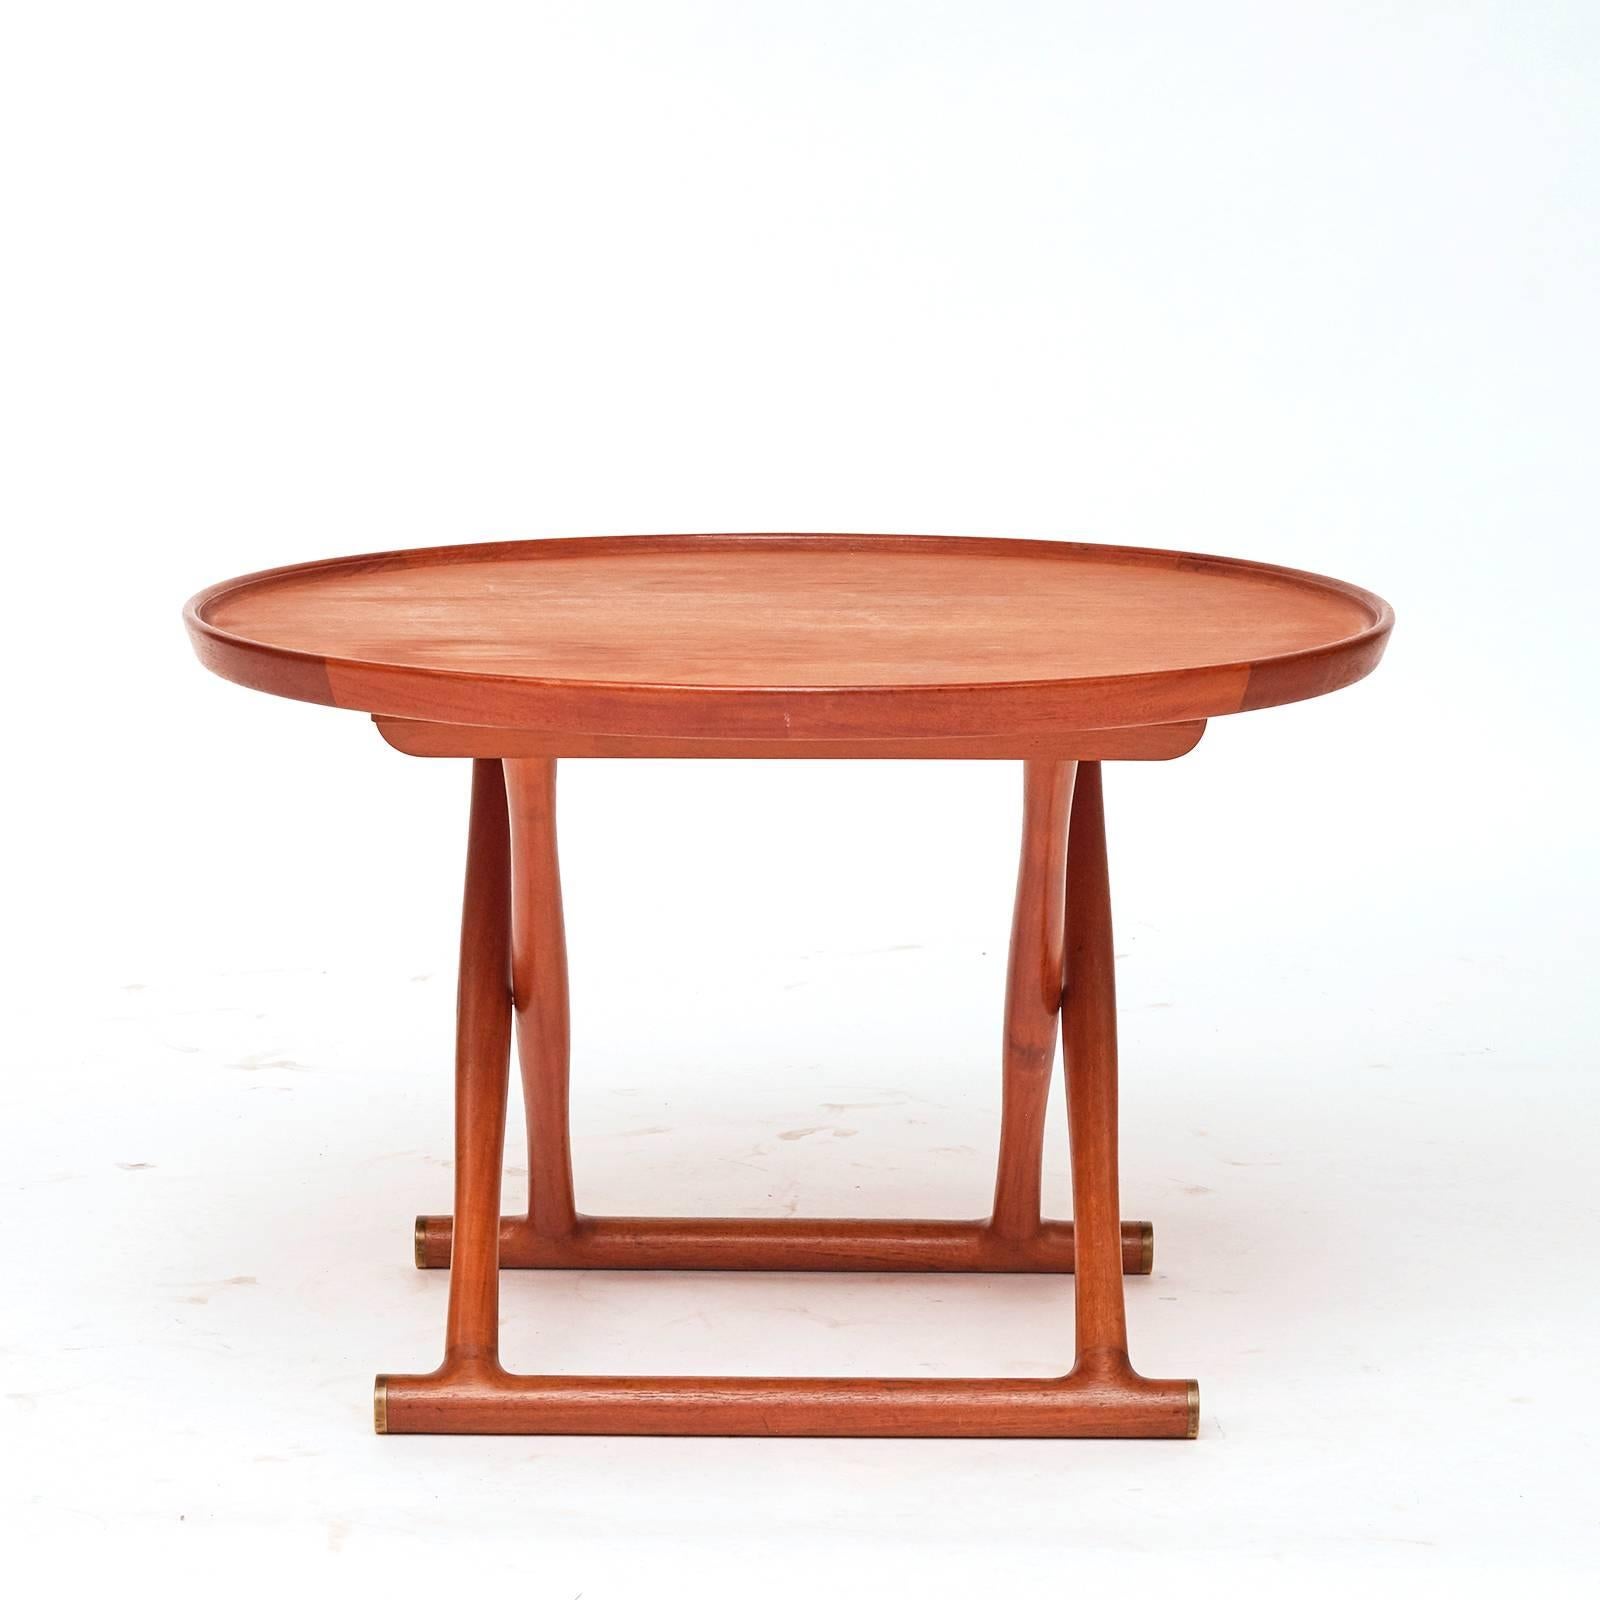 A Classic Danish modern teak wood and brass folding circular table, aptly named the Egyptian table due to the ancient form. The circular folding lipped top above cross-supports ending with concave brass caps. The design of this table was from 1954.